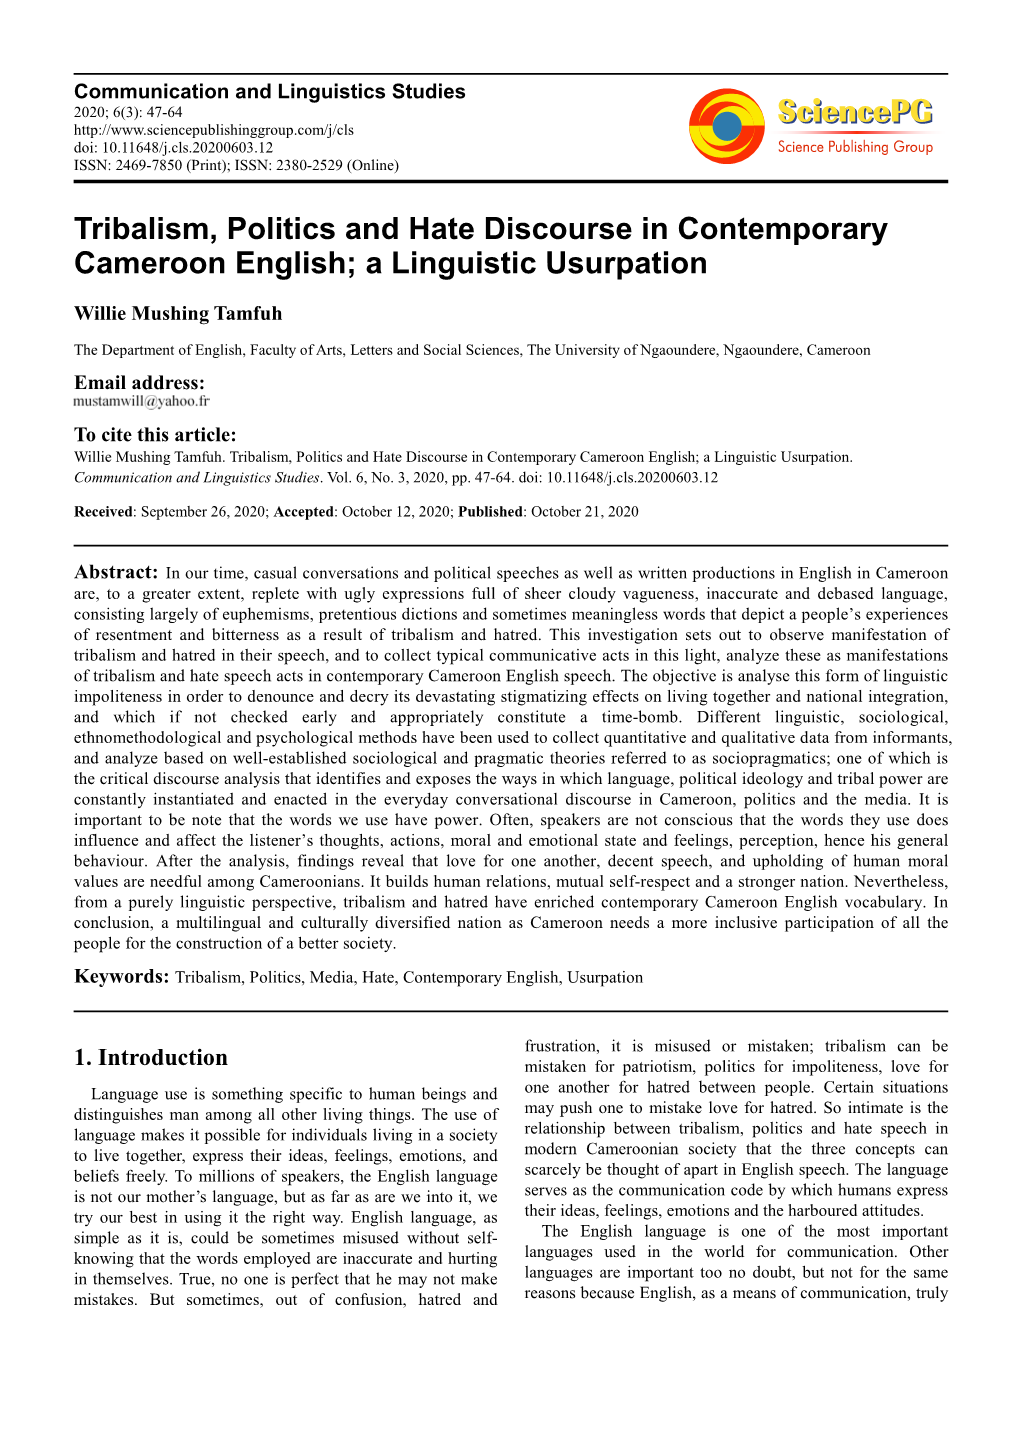 Tribalism, Politics and Hate Discourse in Contemporary Cameroon English; a Linguistic Usurpation